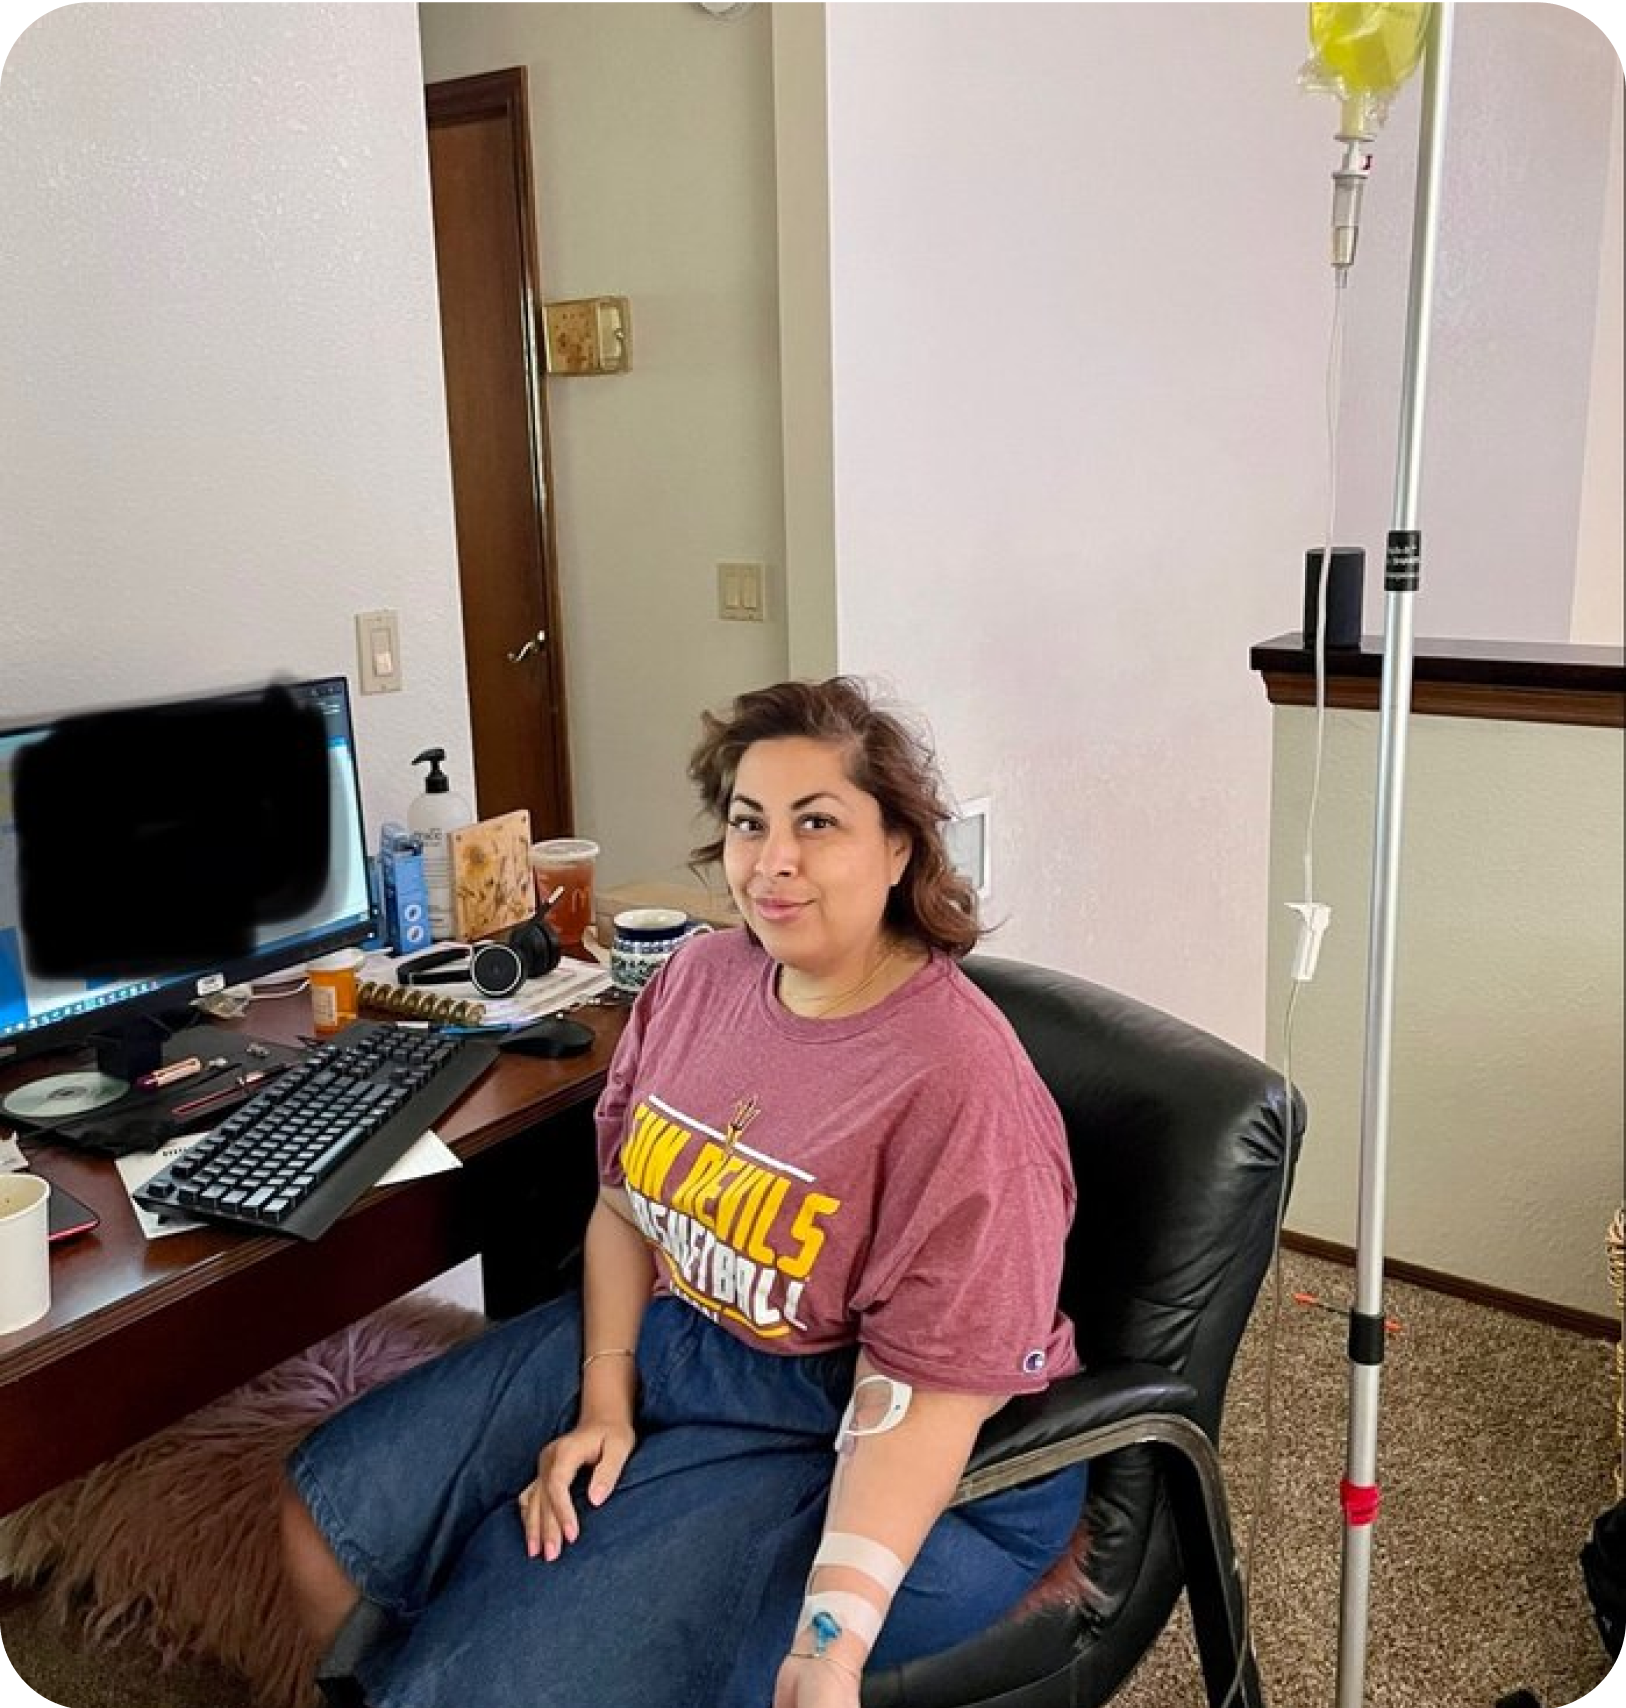 A woman is sitting in a chair with an iv in her hand